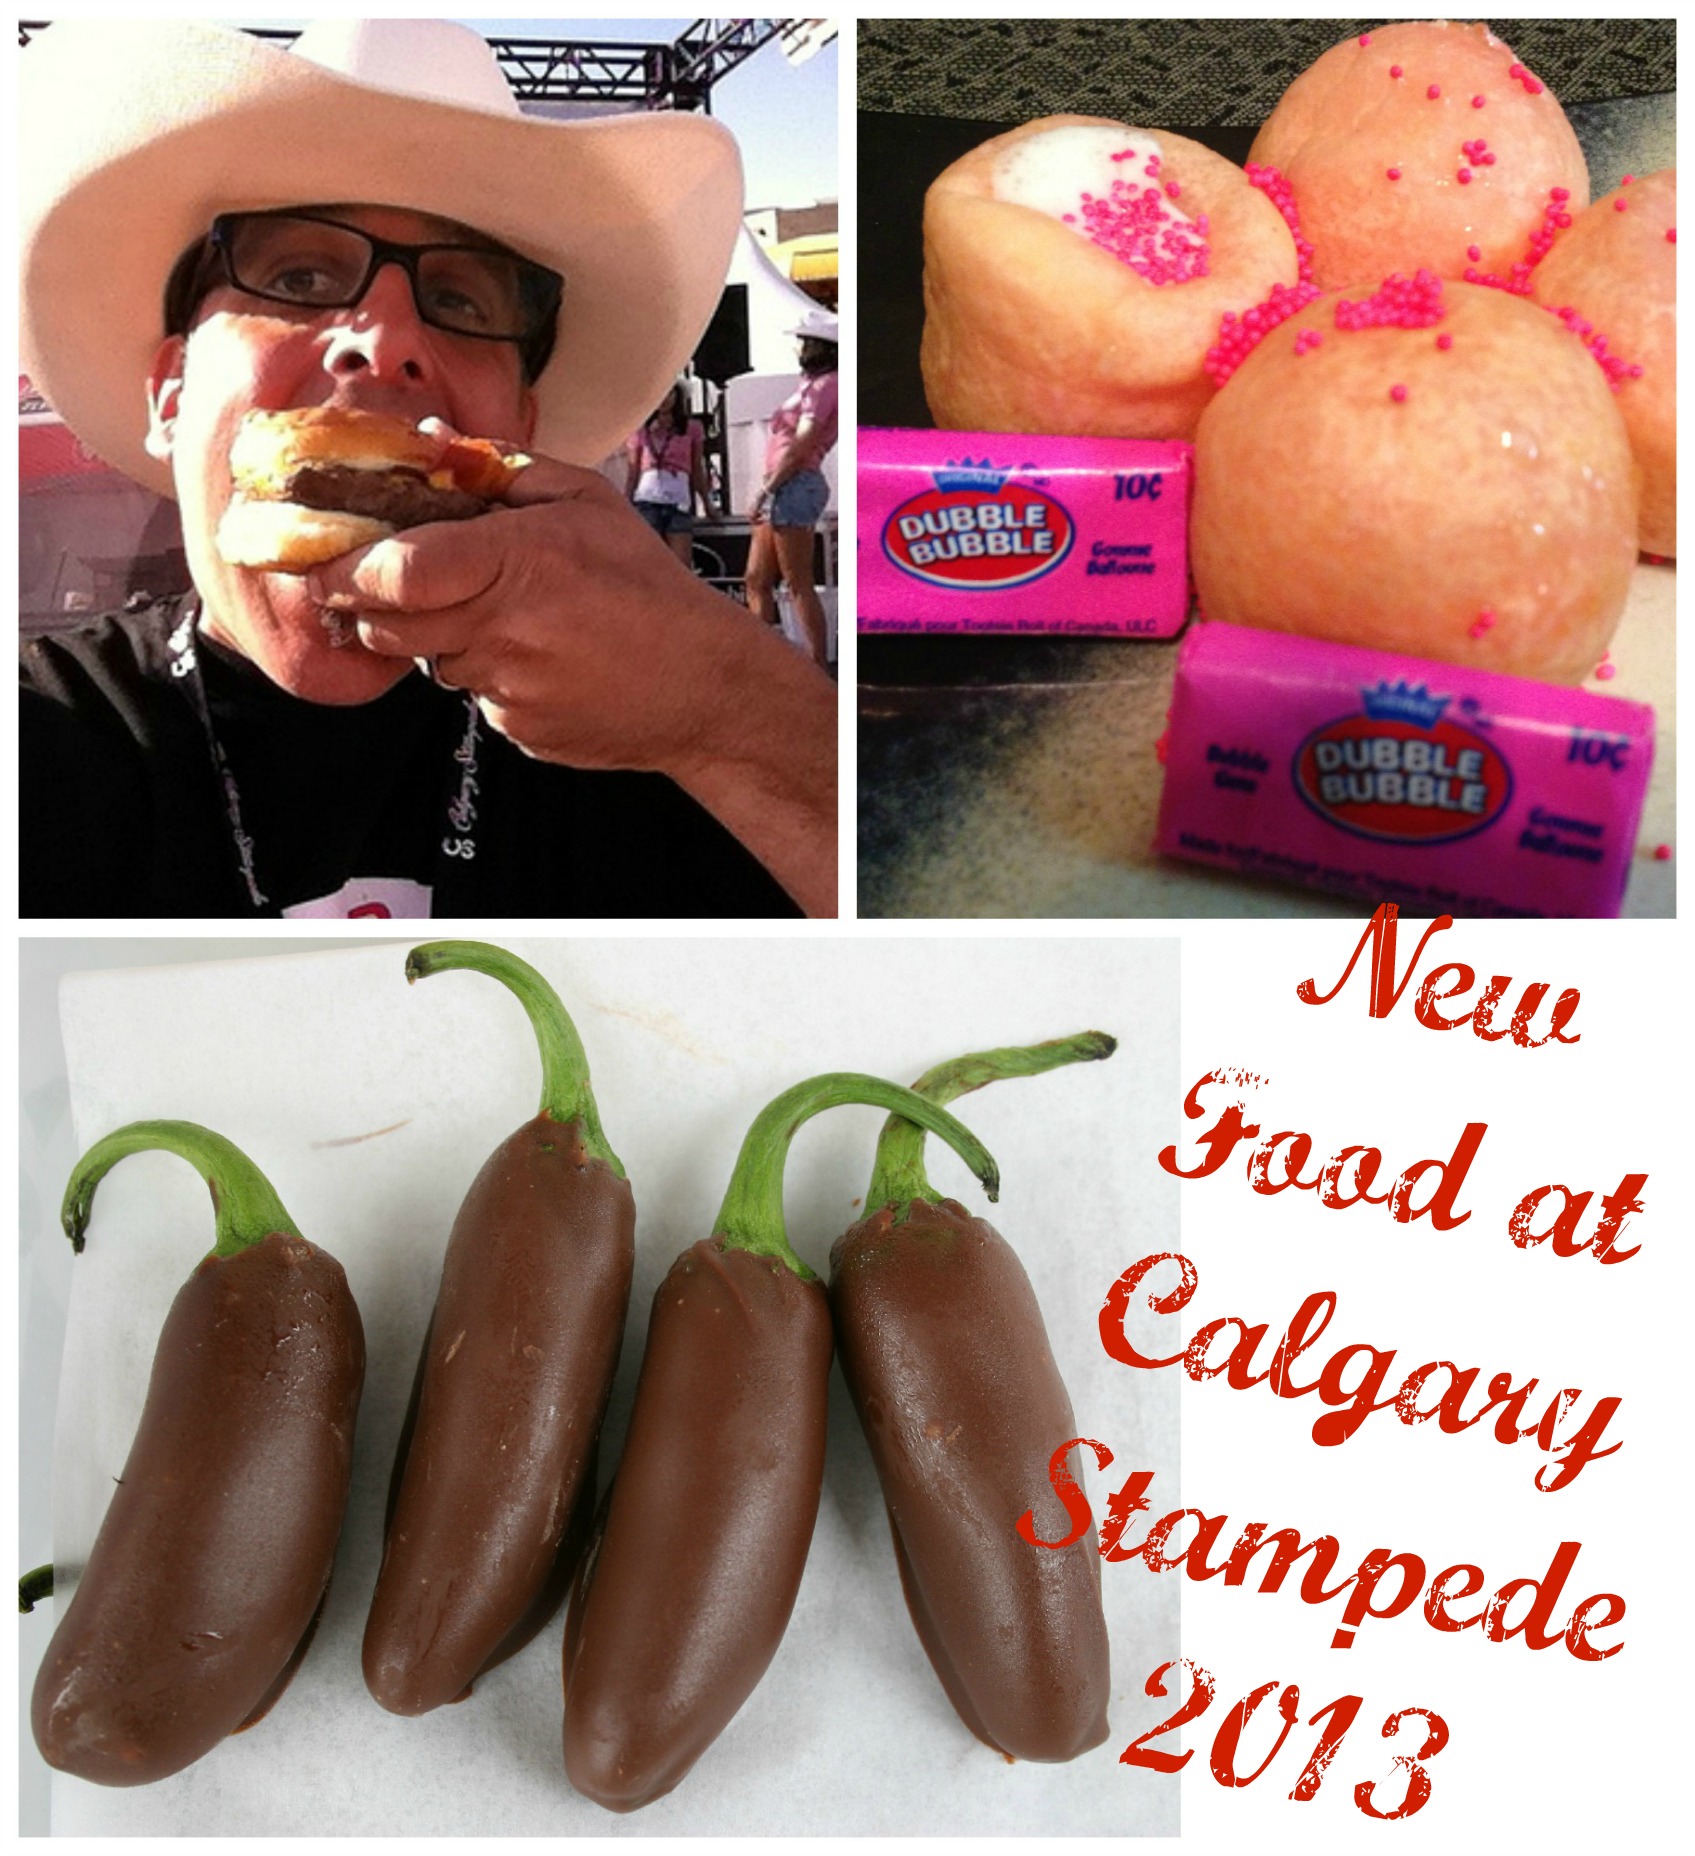 New Food For Calgary Stampede 2013 includes Deep Fried Gum and Chocolate Jalapenos #food #calgary #yyc #calgarystampede #fairfood #deepfried #carnival #countyfair